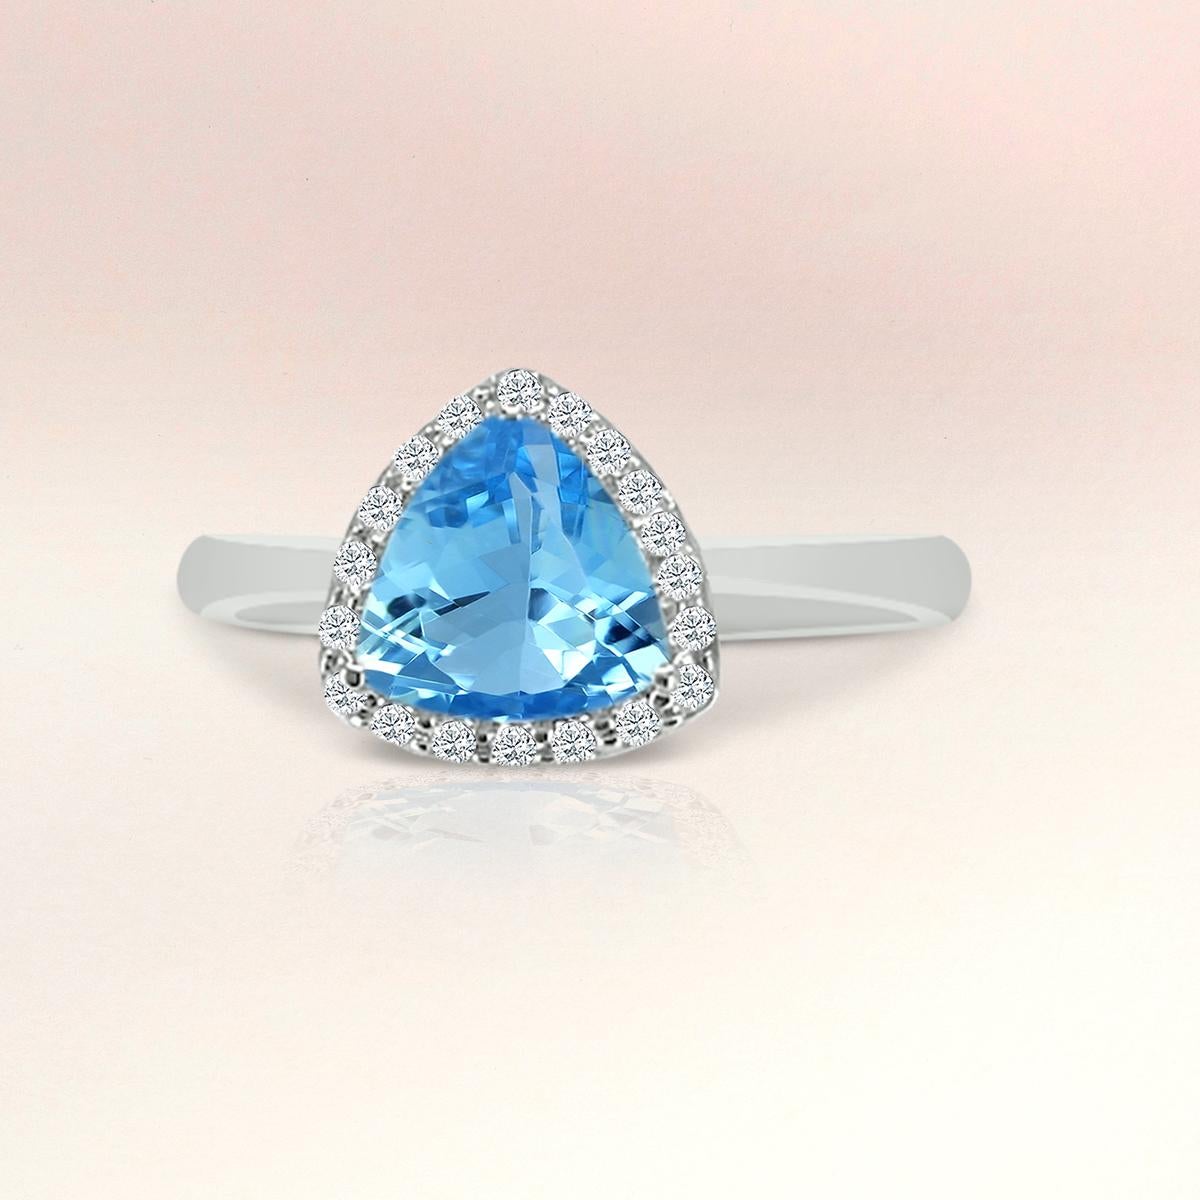 Modern 14K White Gold 1.00cts Aquamarine and Diamond Ring, Style# TS1078AQR 22058/4 For Sale